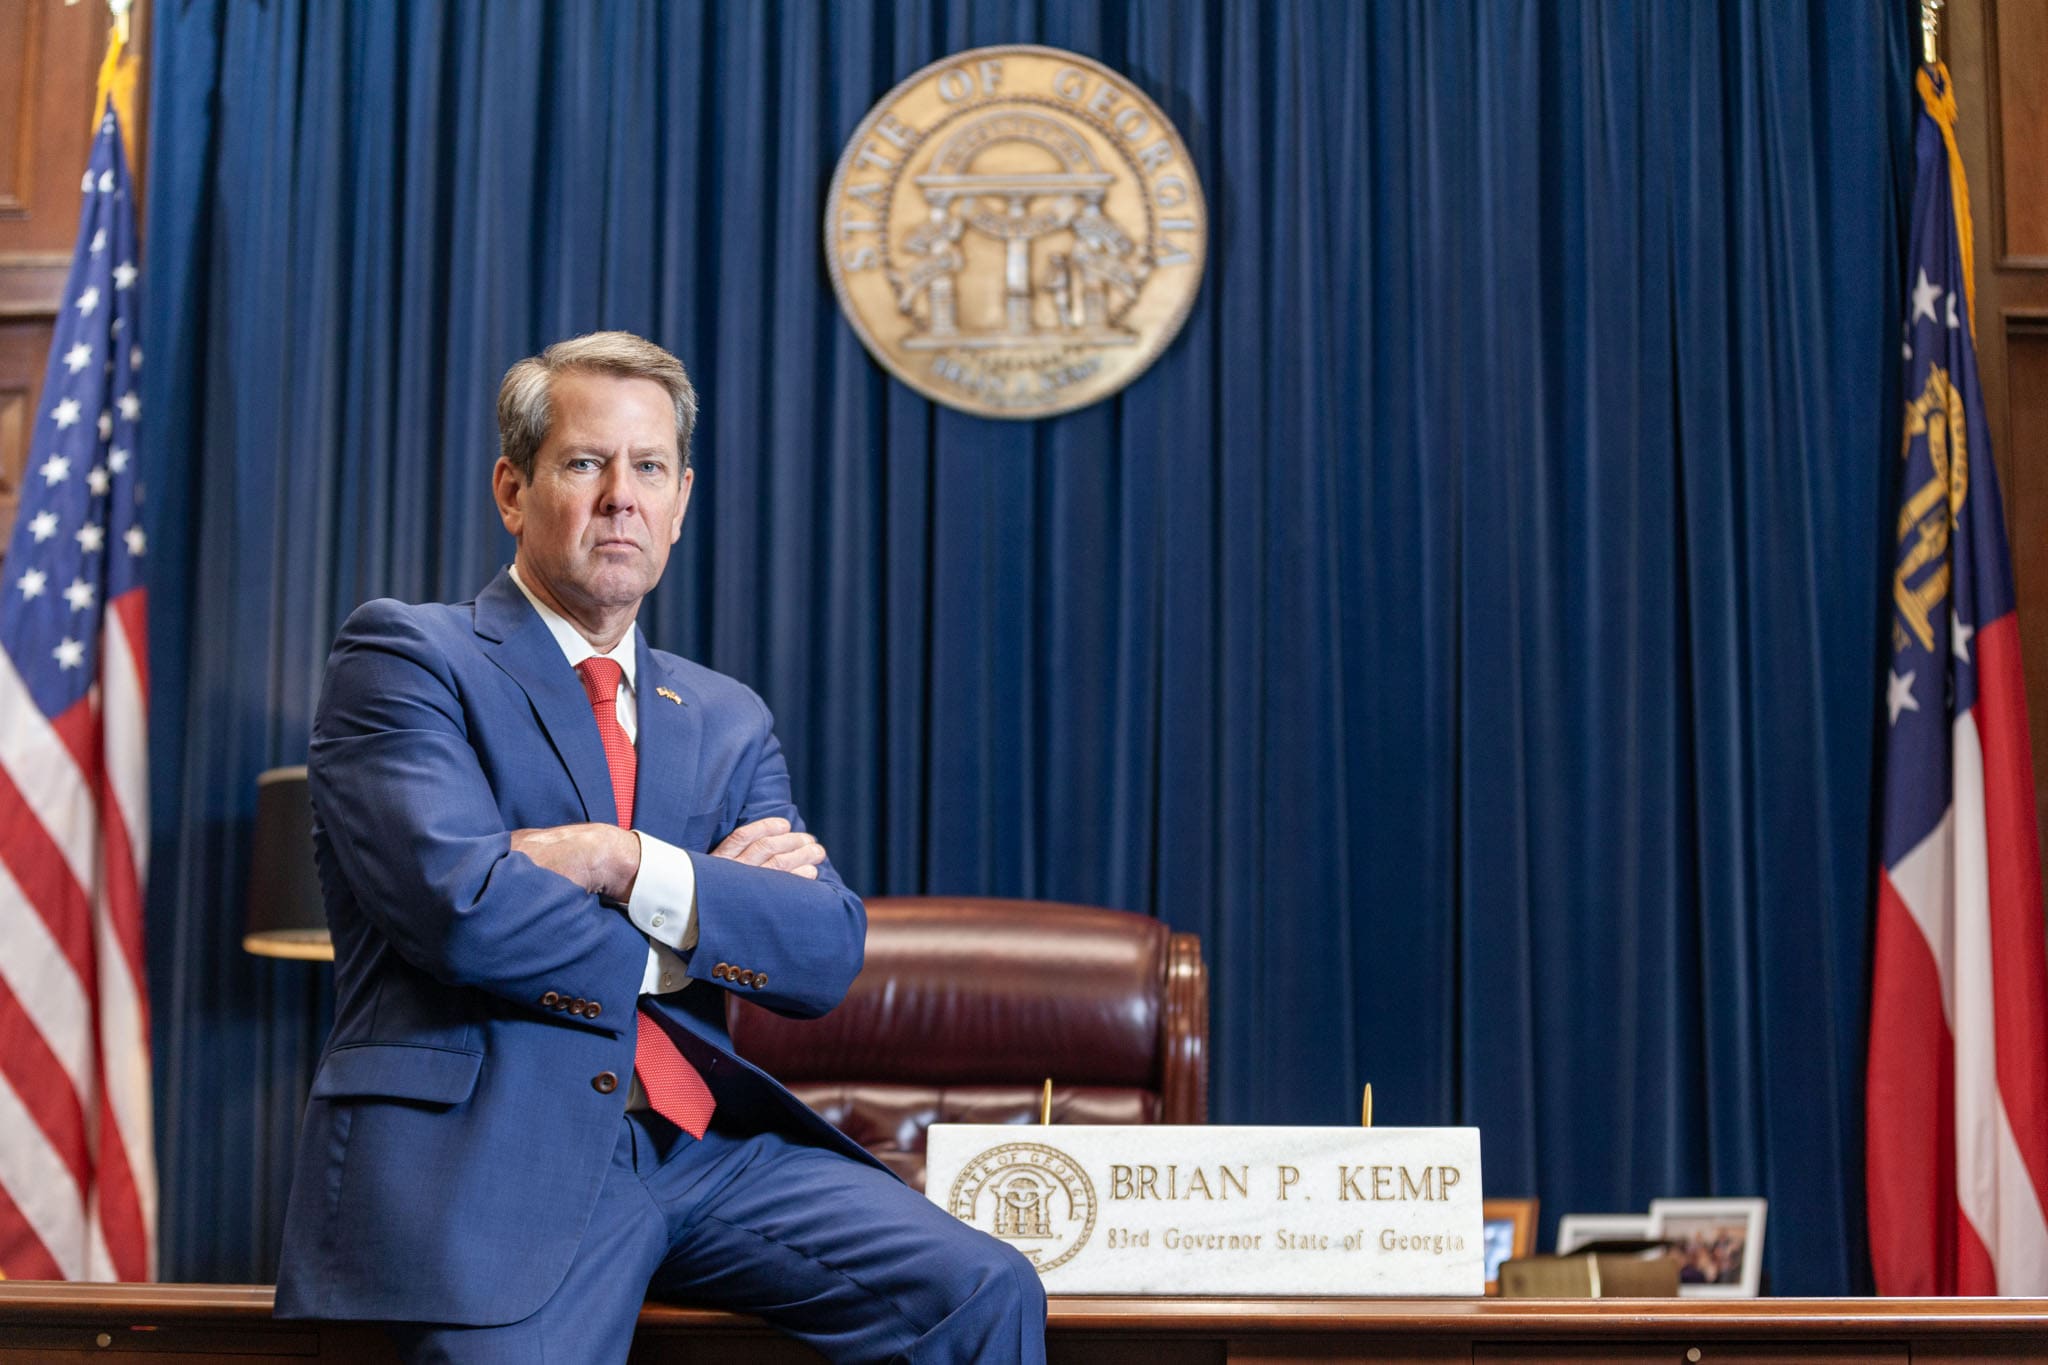 Georgia-Governor-Brian-Kemp-sitting-with-arms-folded-on-his-desk-at-the-Georgia-State-Capitol